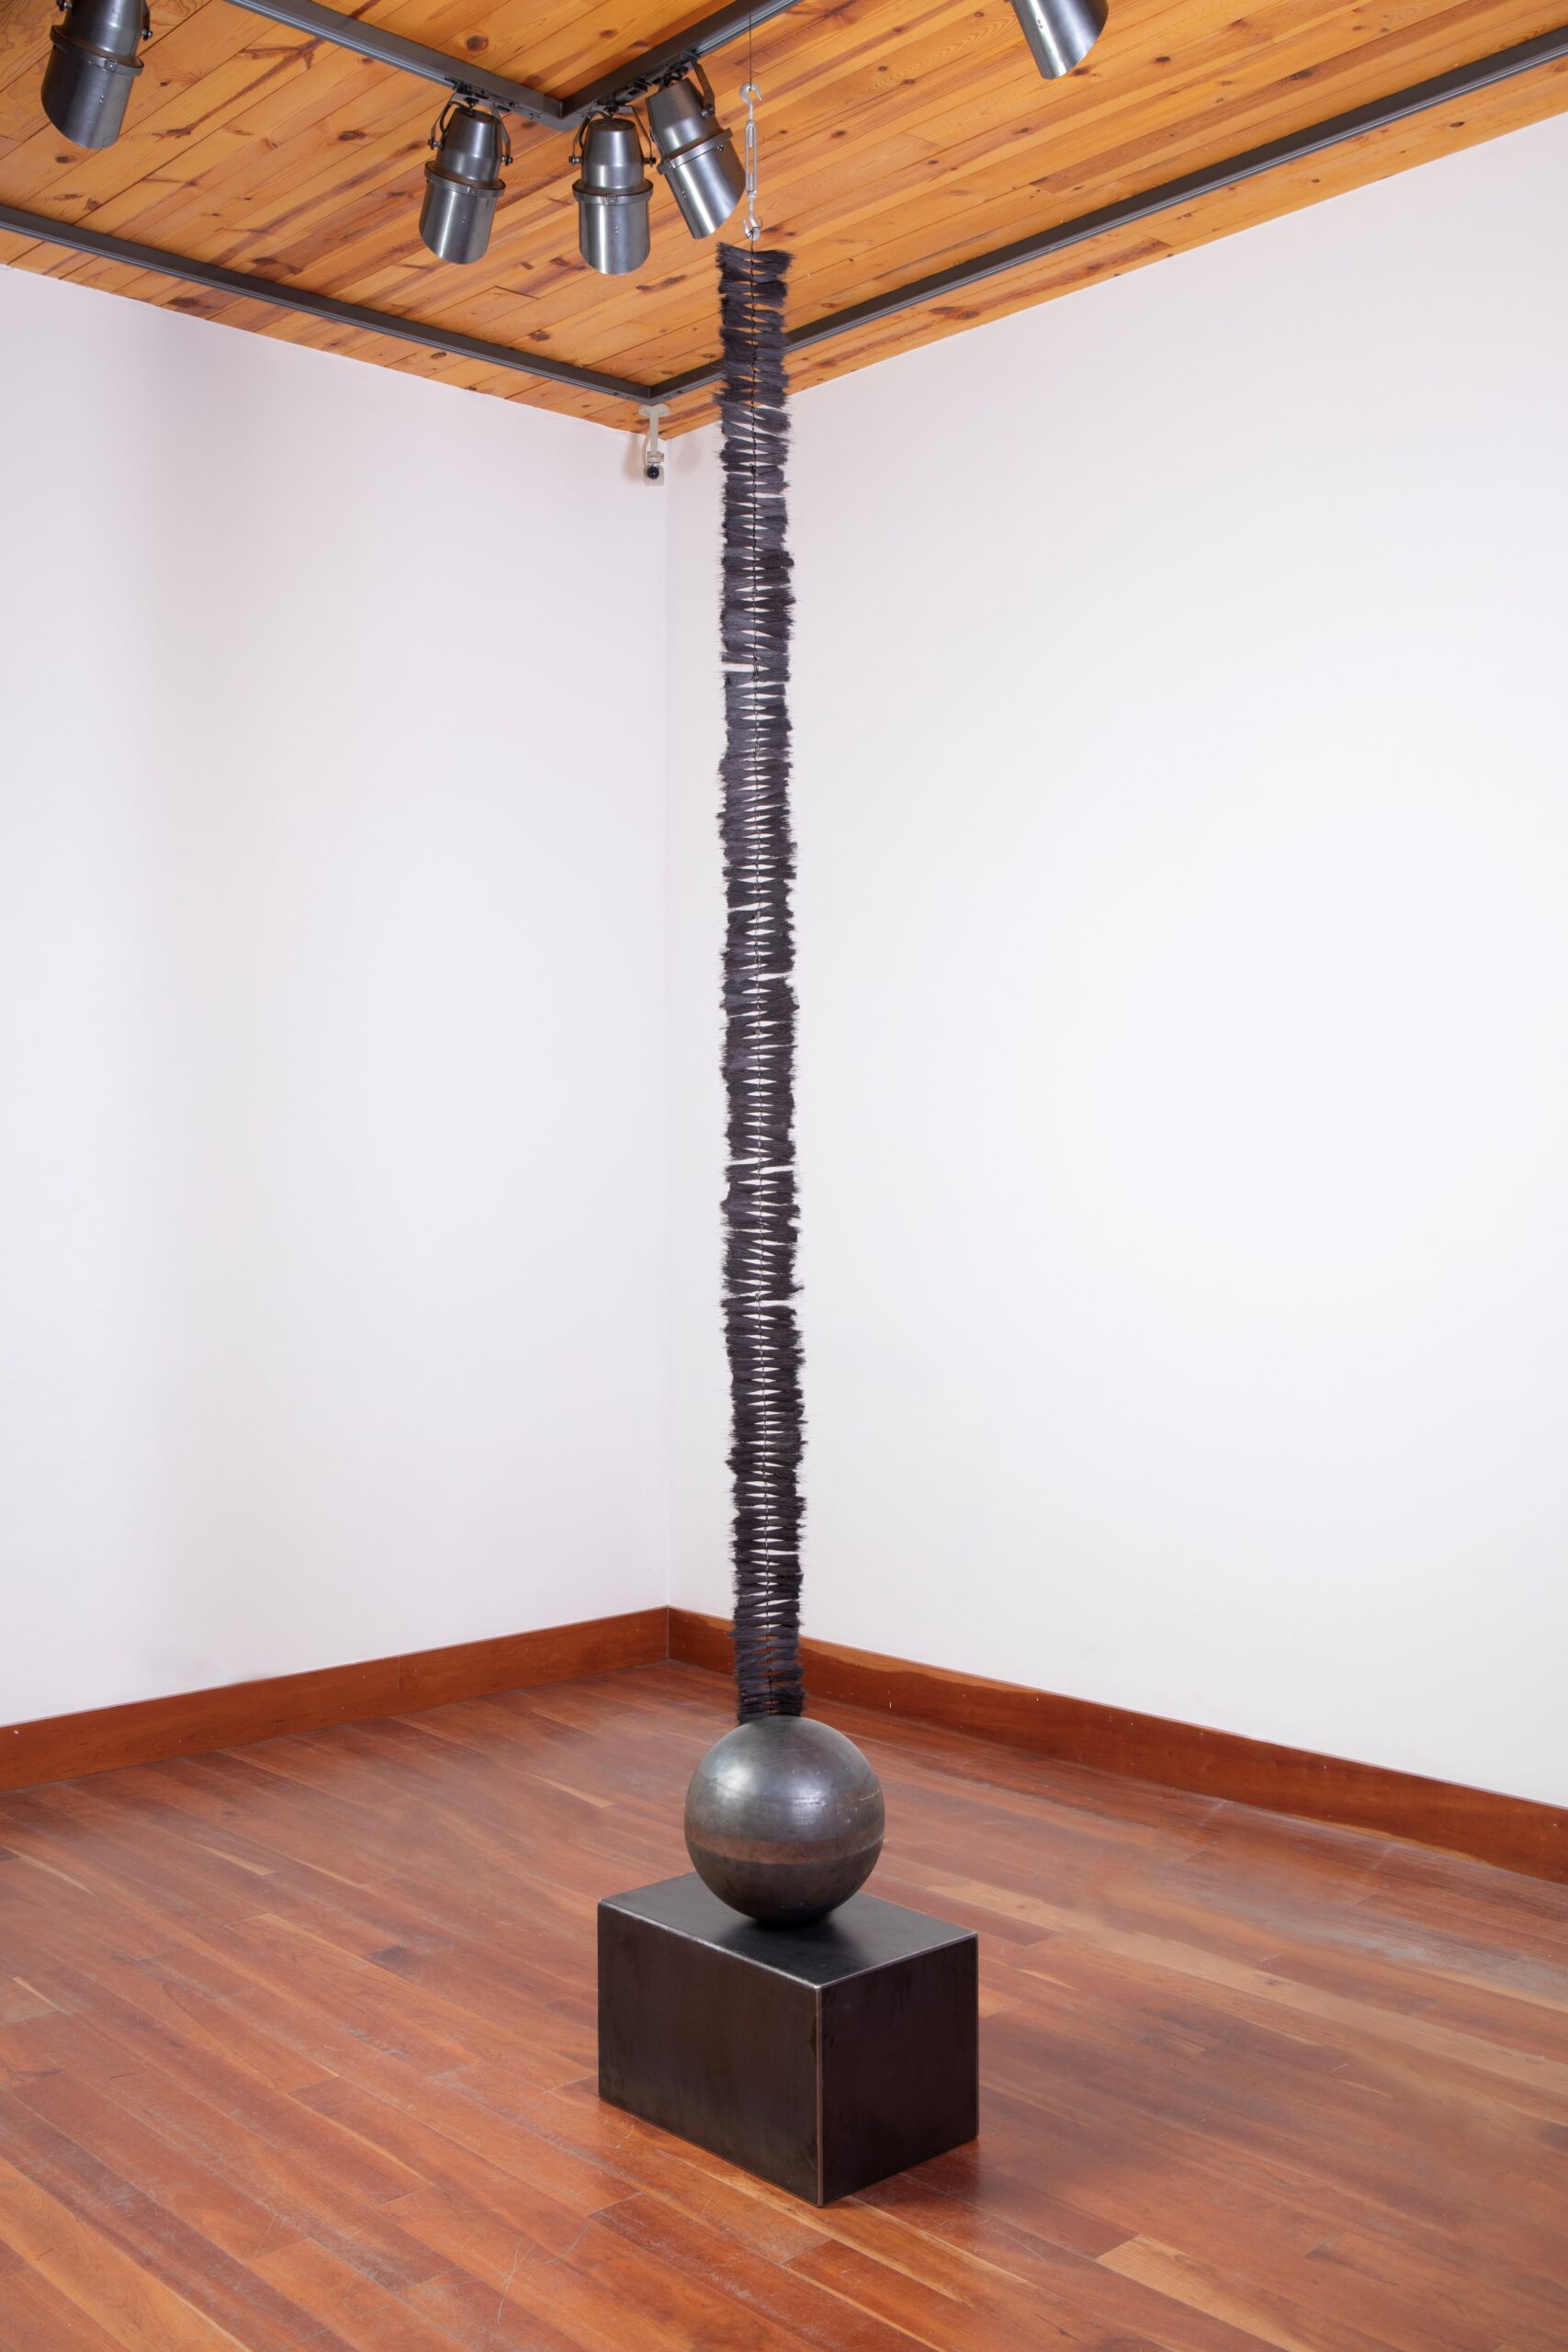 
							

									Elizabeth Hohimer									Totem 5 2023									agave fiber, wire, steel<br />
127 x 19 1/2 x 12 1/2 inches									


							